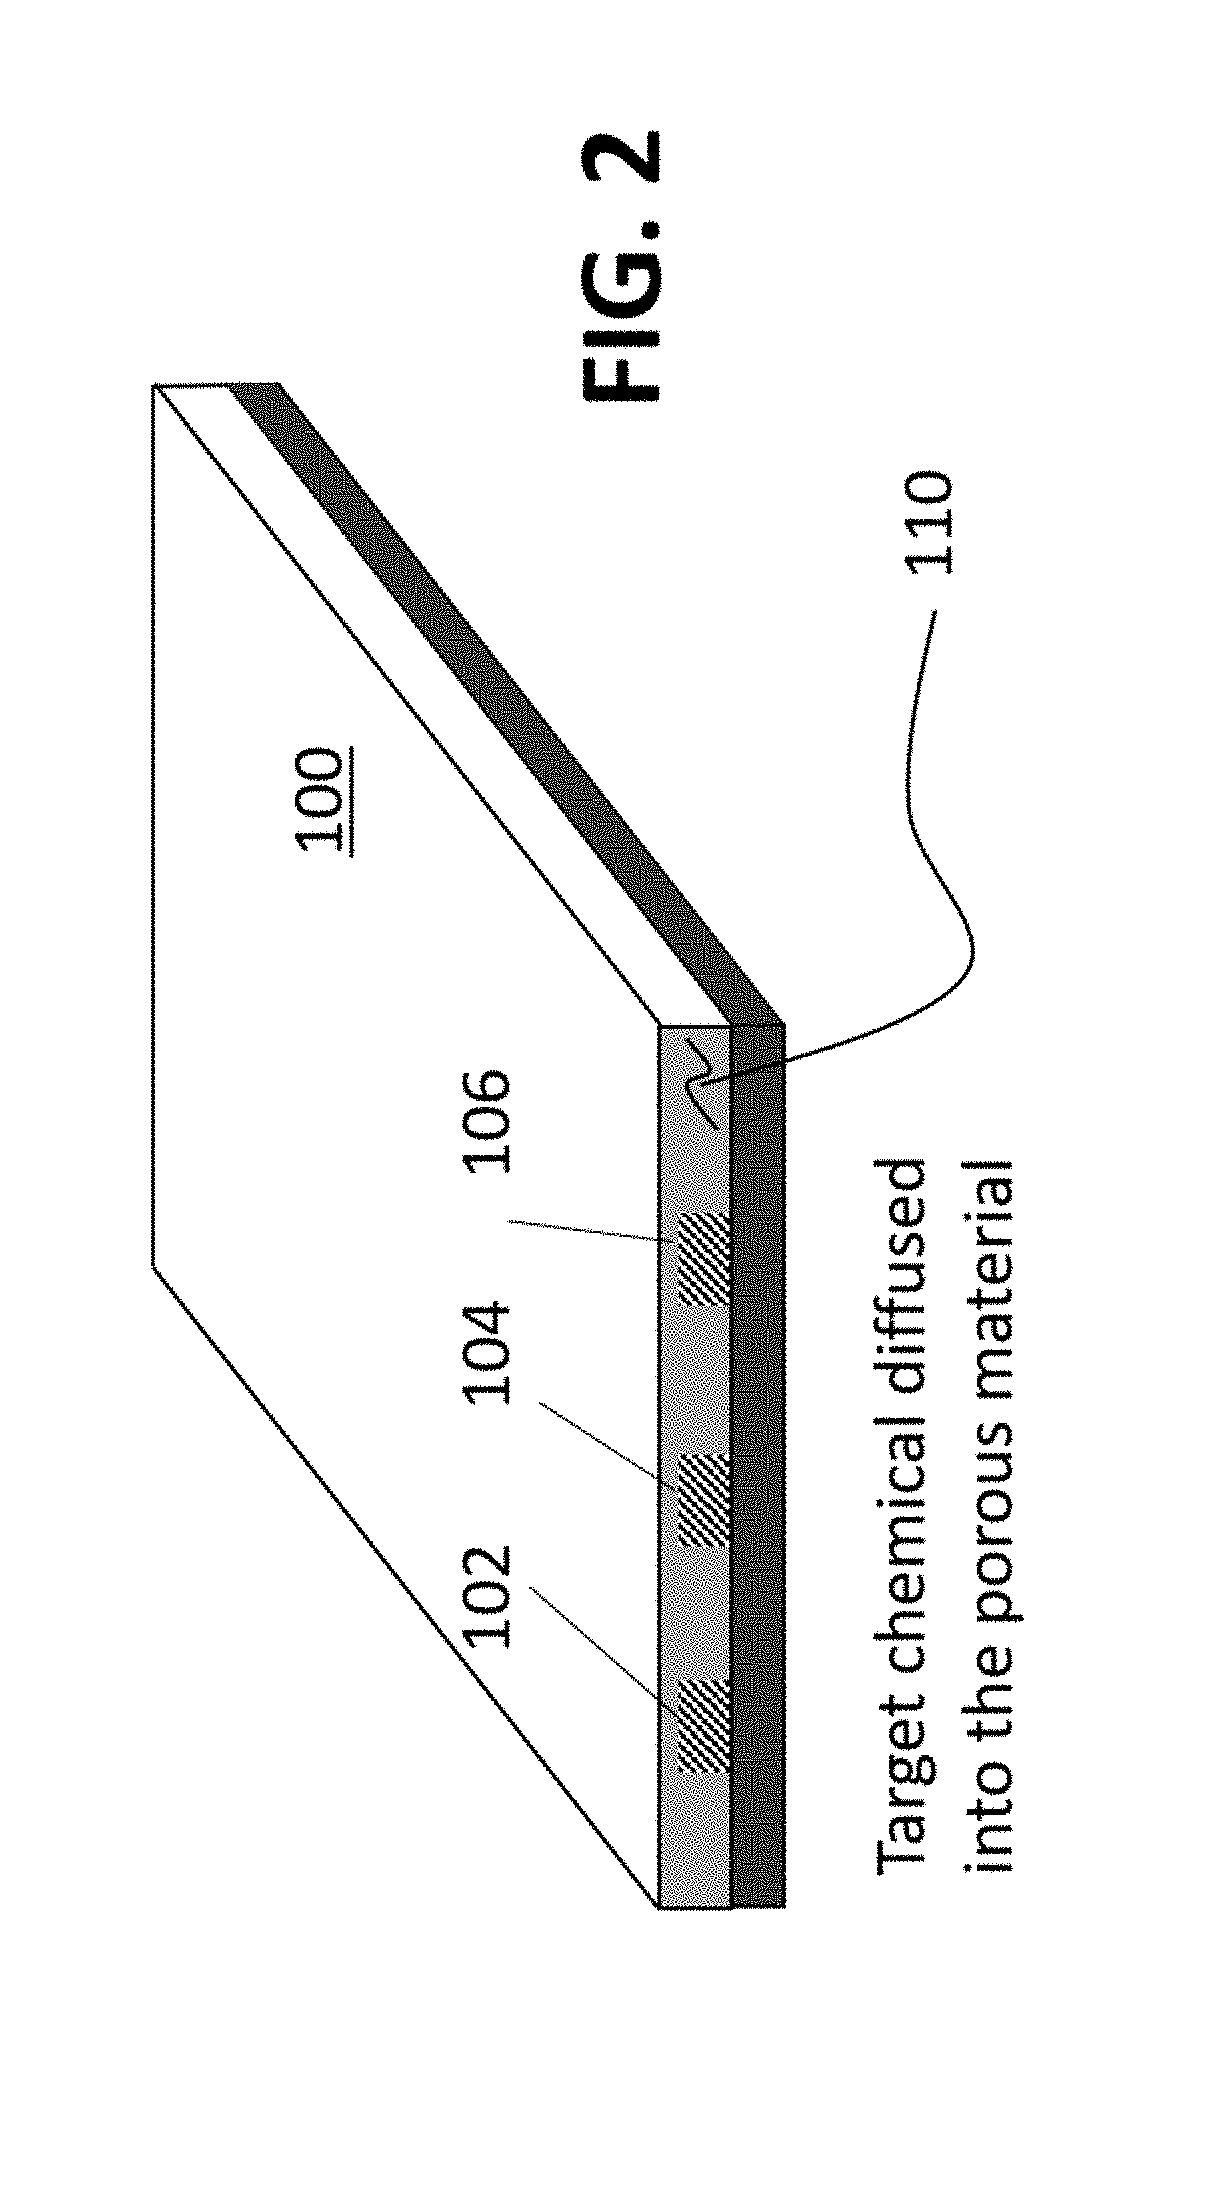 Method and apparatus for continuous gas monitoring using micro-colorimetric sensing and optical tracking of color spatial distribution